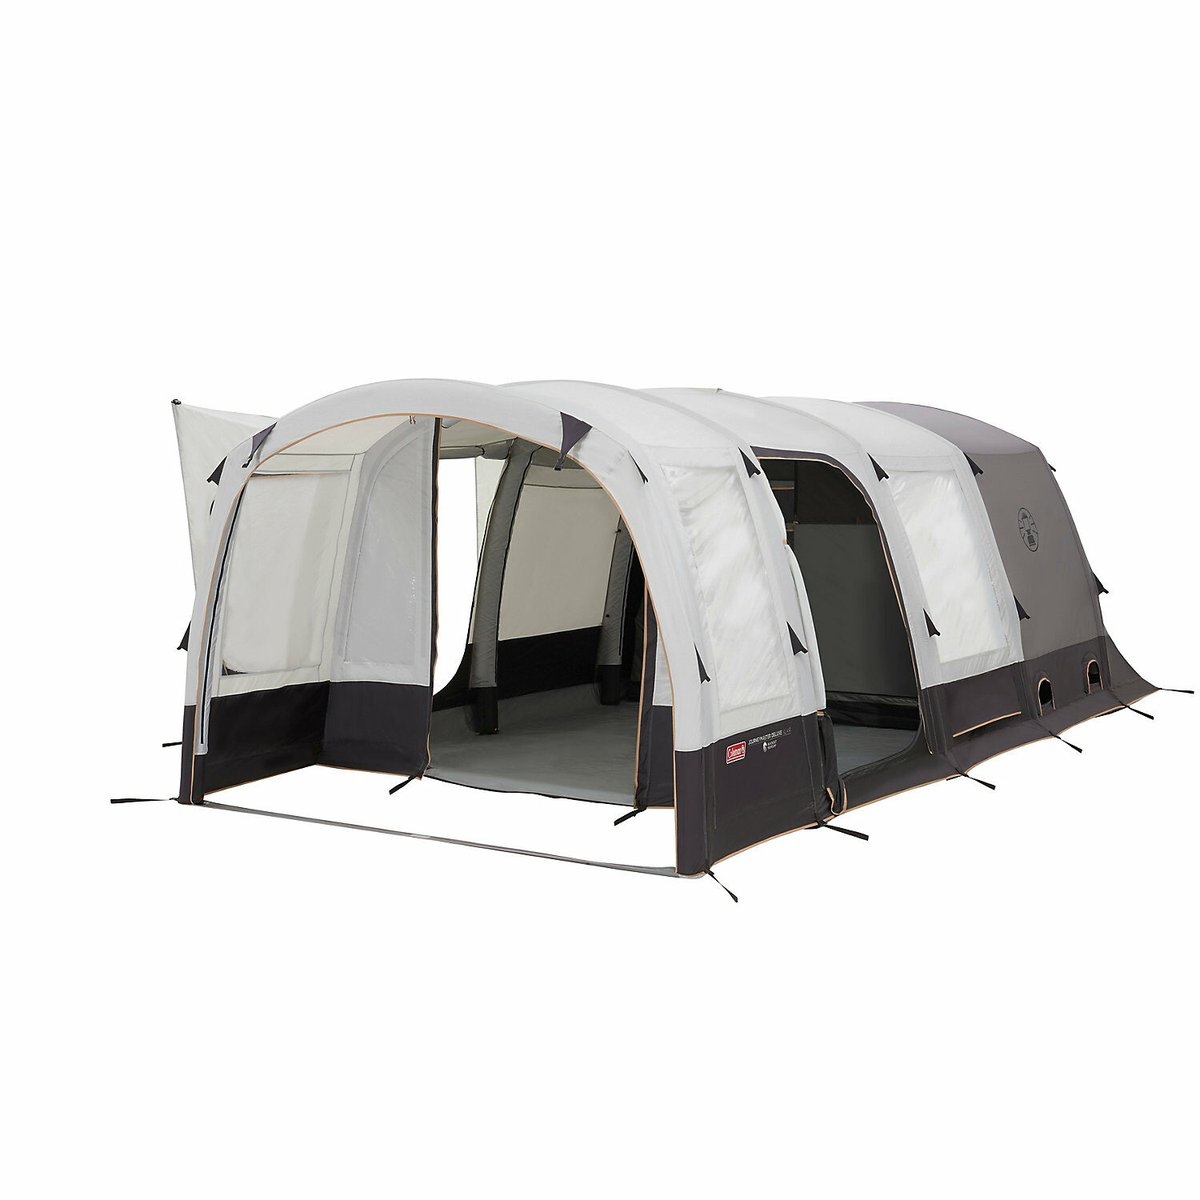 #COLEMAN DRIVE-AWAY AWNING OFFERS! *SECONDS* (Perform, but possible colour-fading) Journeymaster Pro M - (RRP £599) NOW £299 Pro XL - (RRP £799) NOW £349 Deluxe Air M - (RRP £999) NOW £399 Deluxe Air XL - (RRP £1199) NOW £599 >tinyurl.com/28y6759c #MotorAwnings #CamperAwnings